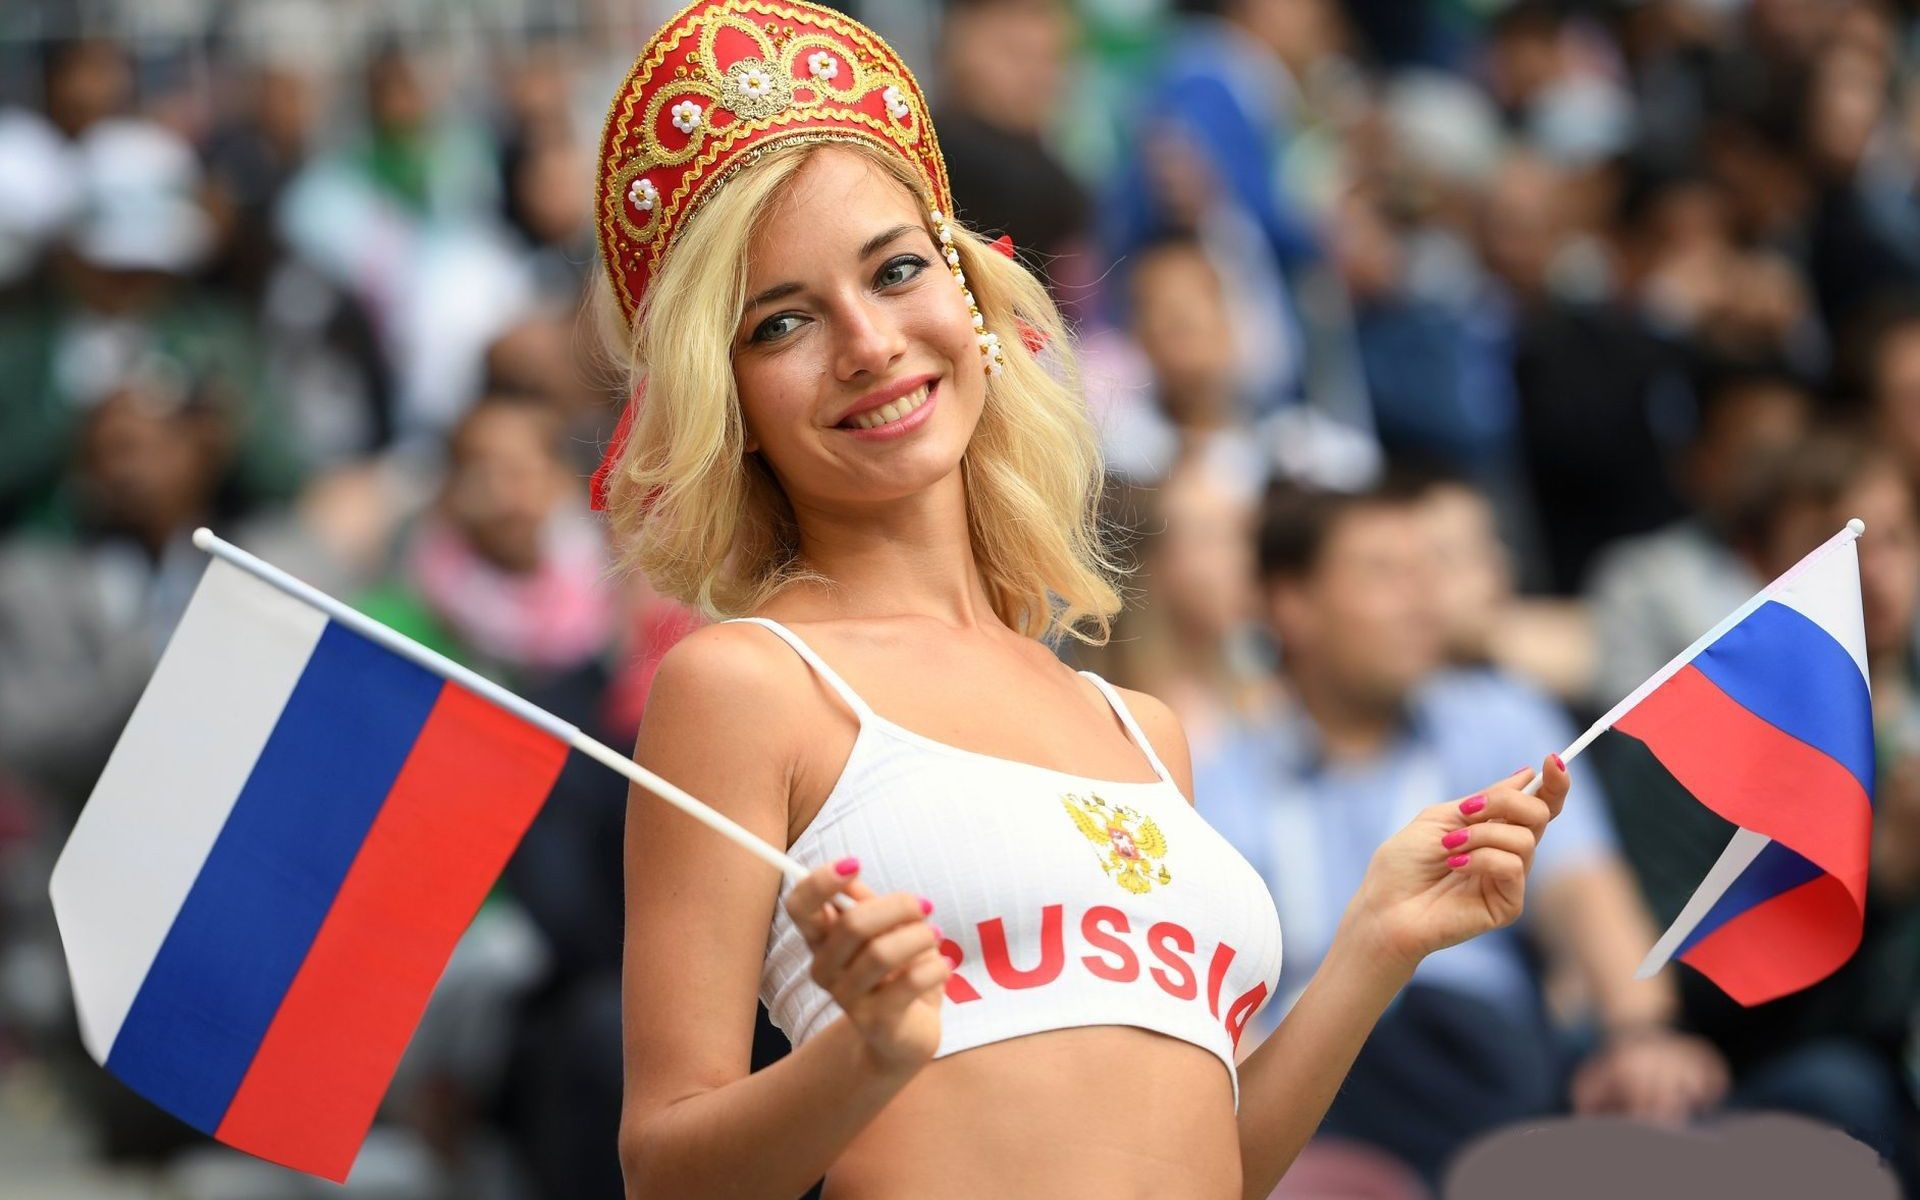 Wallpaper The World Cup, smile Russian girl, flag 1920x1200 HD Picture, Image